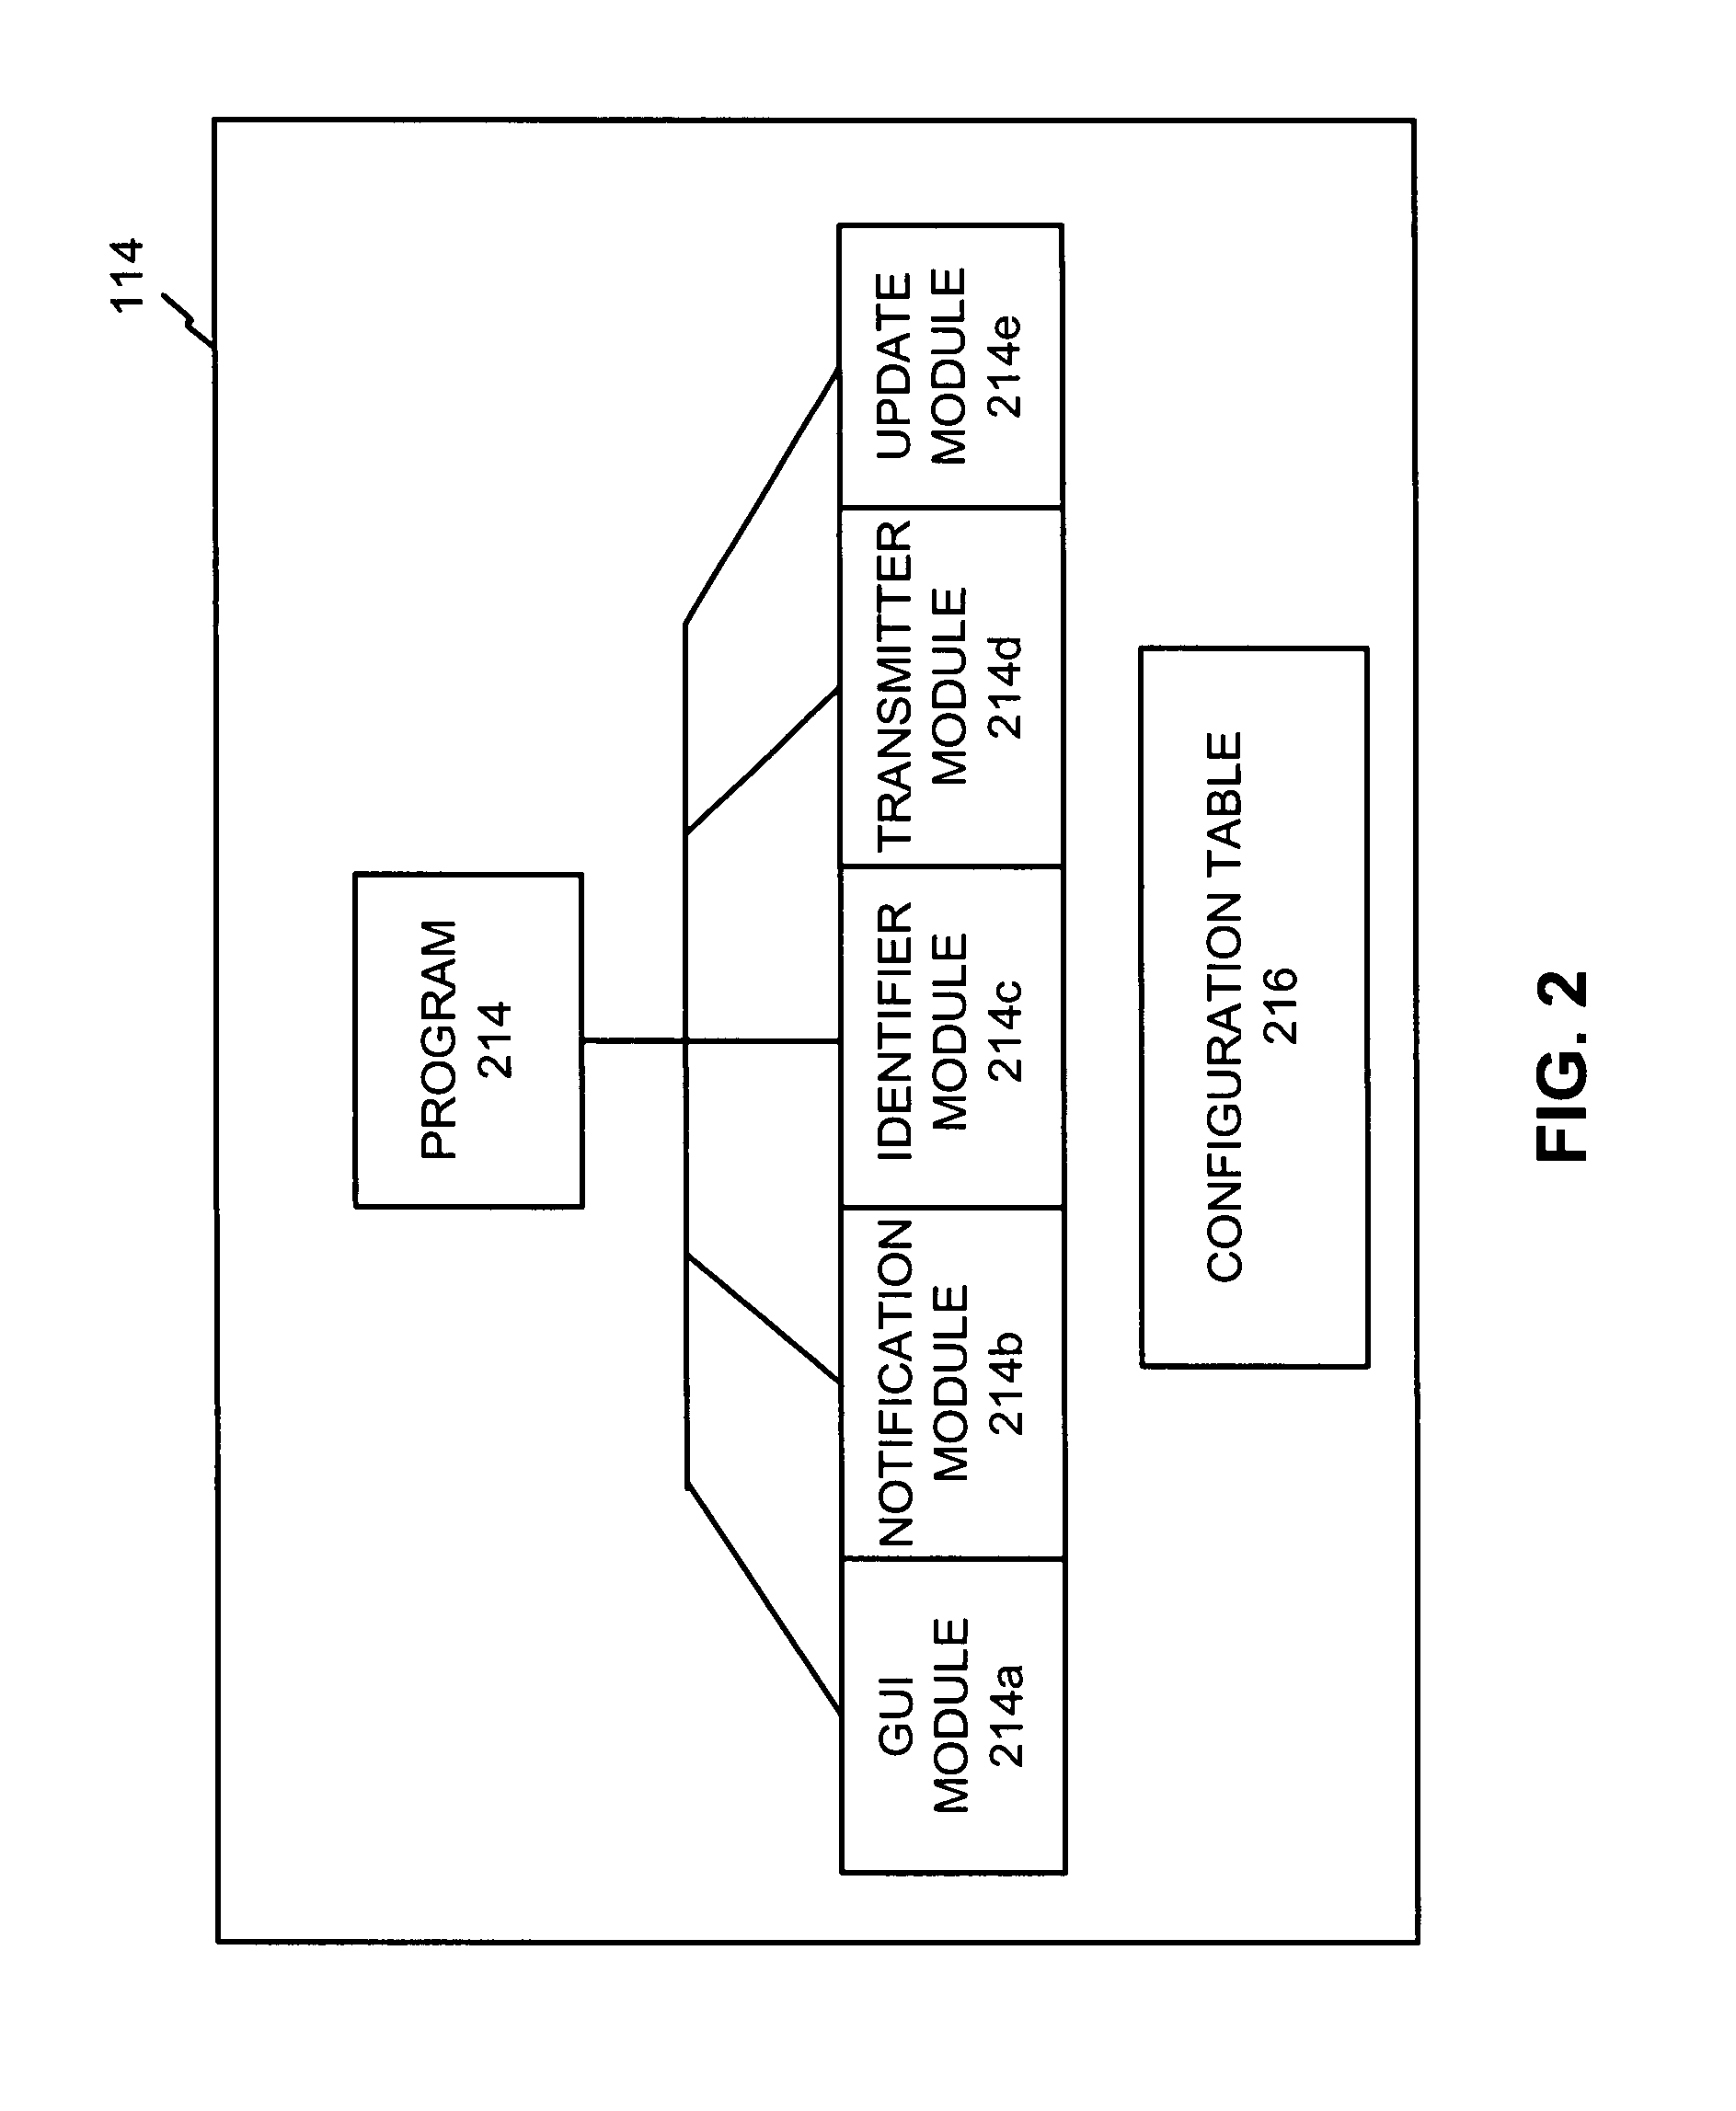 System and methods for enterprise path management